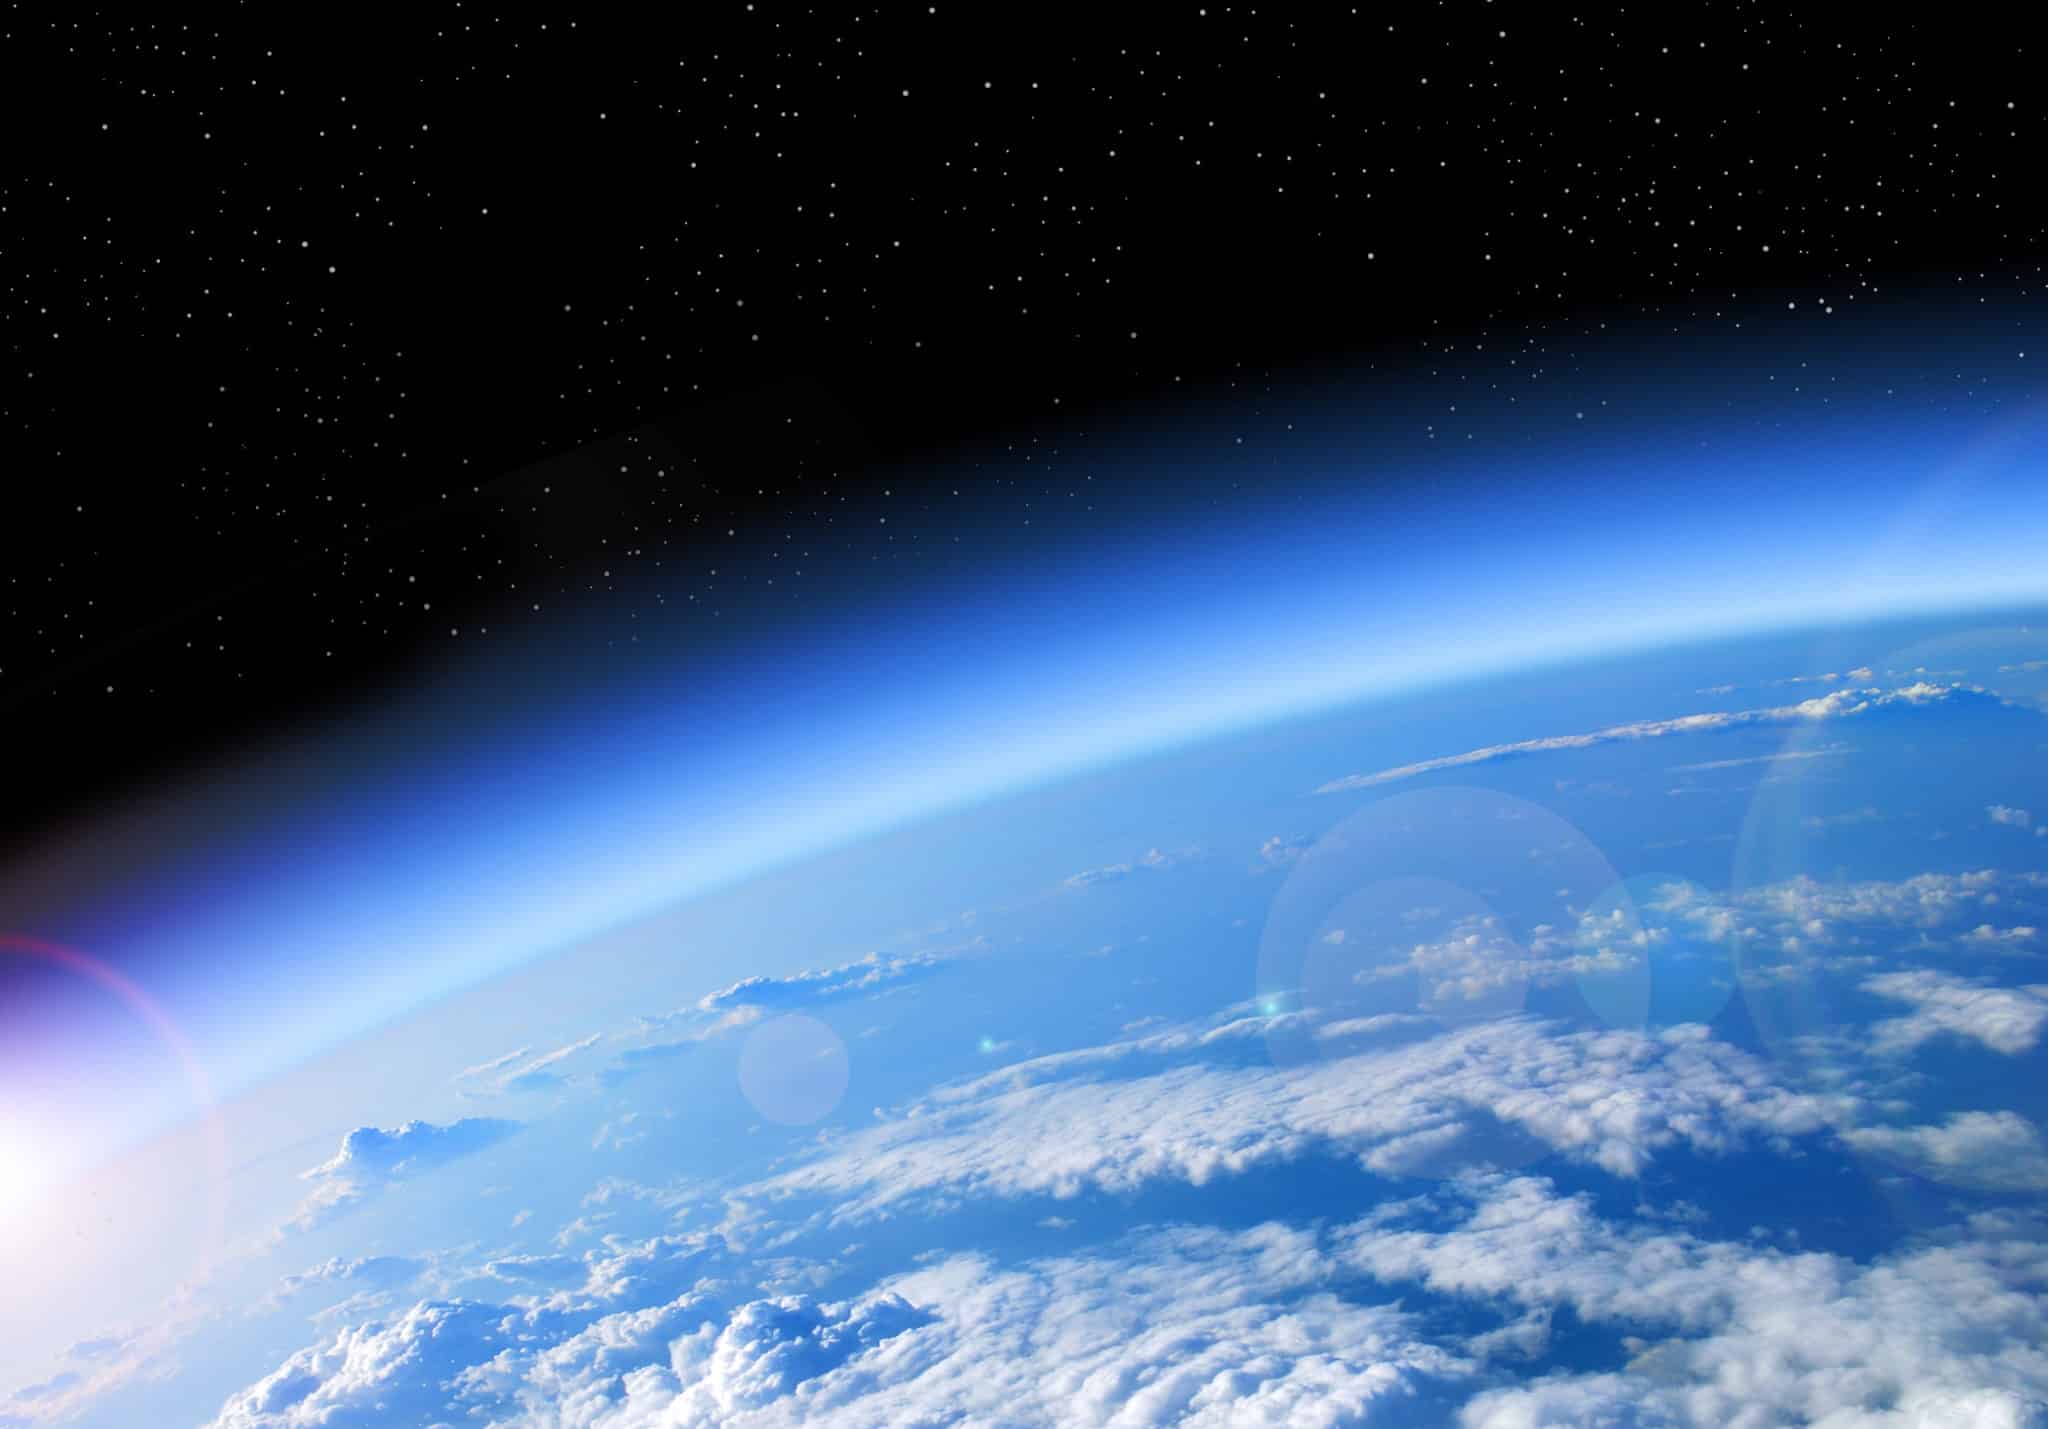 The ozone layer is recovering and restoring wind circulation